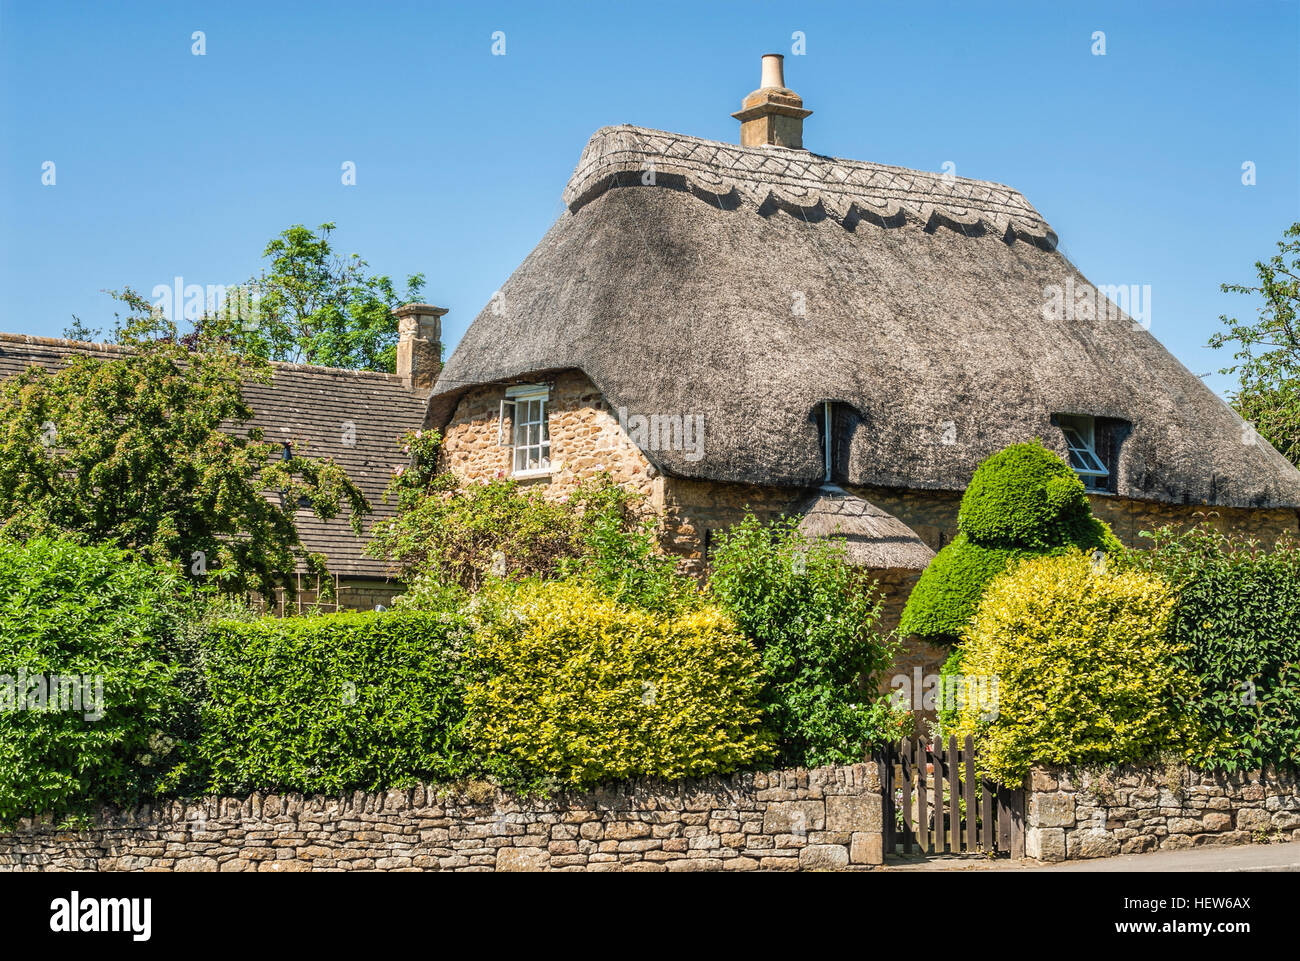 Typical Cotsworld House in Chipping Campden. Chipping Campden is a small market town within the Cotswold district of Gloucestershire, England. Stock Photo